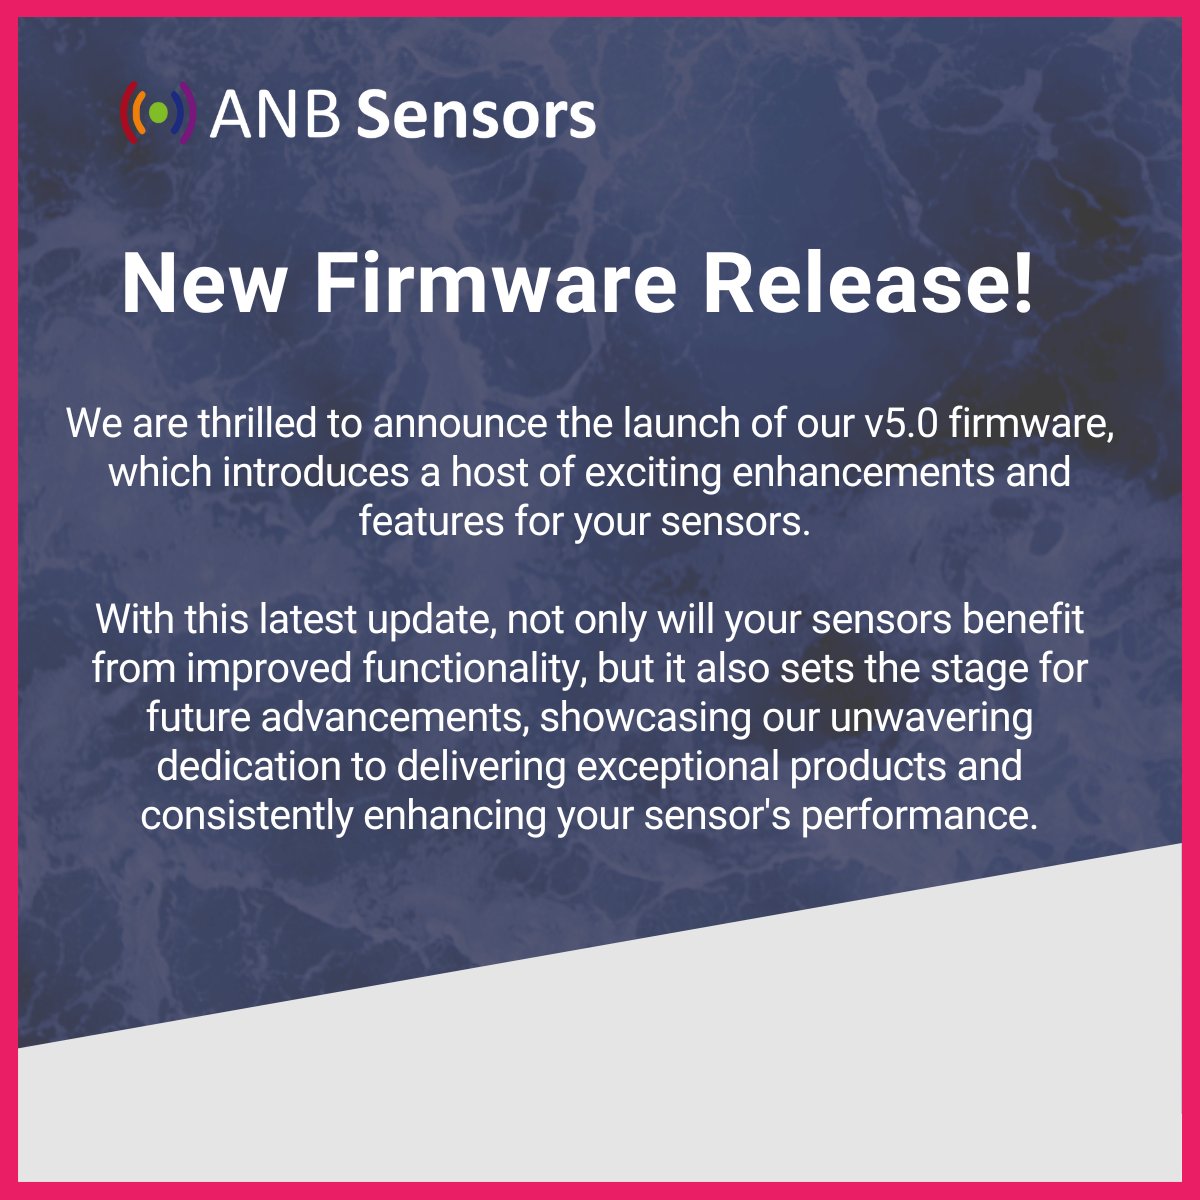 **New firmware release** We're extremely happy to announce the release of our latest firmware! The v5.0 firmware includes several exciting enhancements and features! Read all about it by clicking on the link below! anbsensors.com/firmware-5-0-r… #Firmware #Update #pH #Sensors